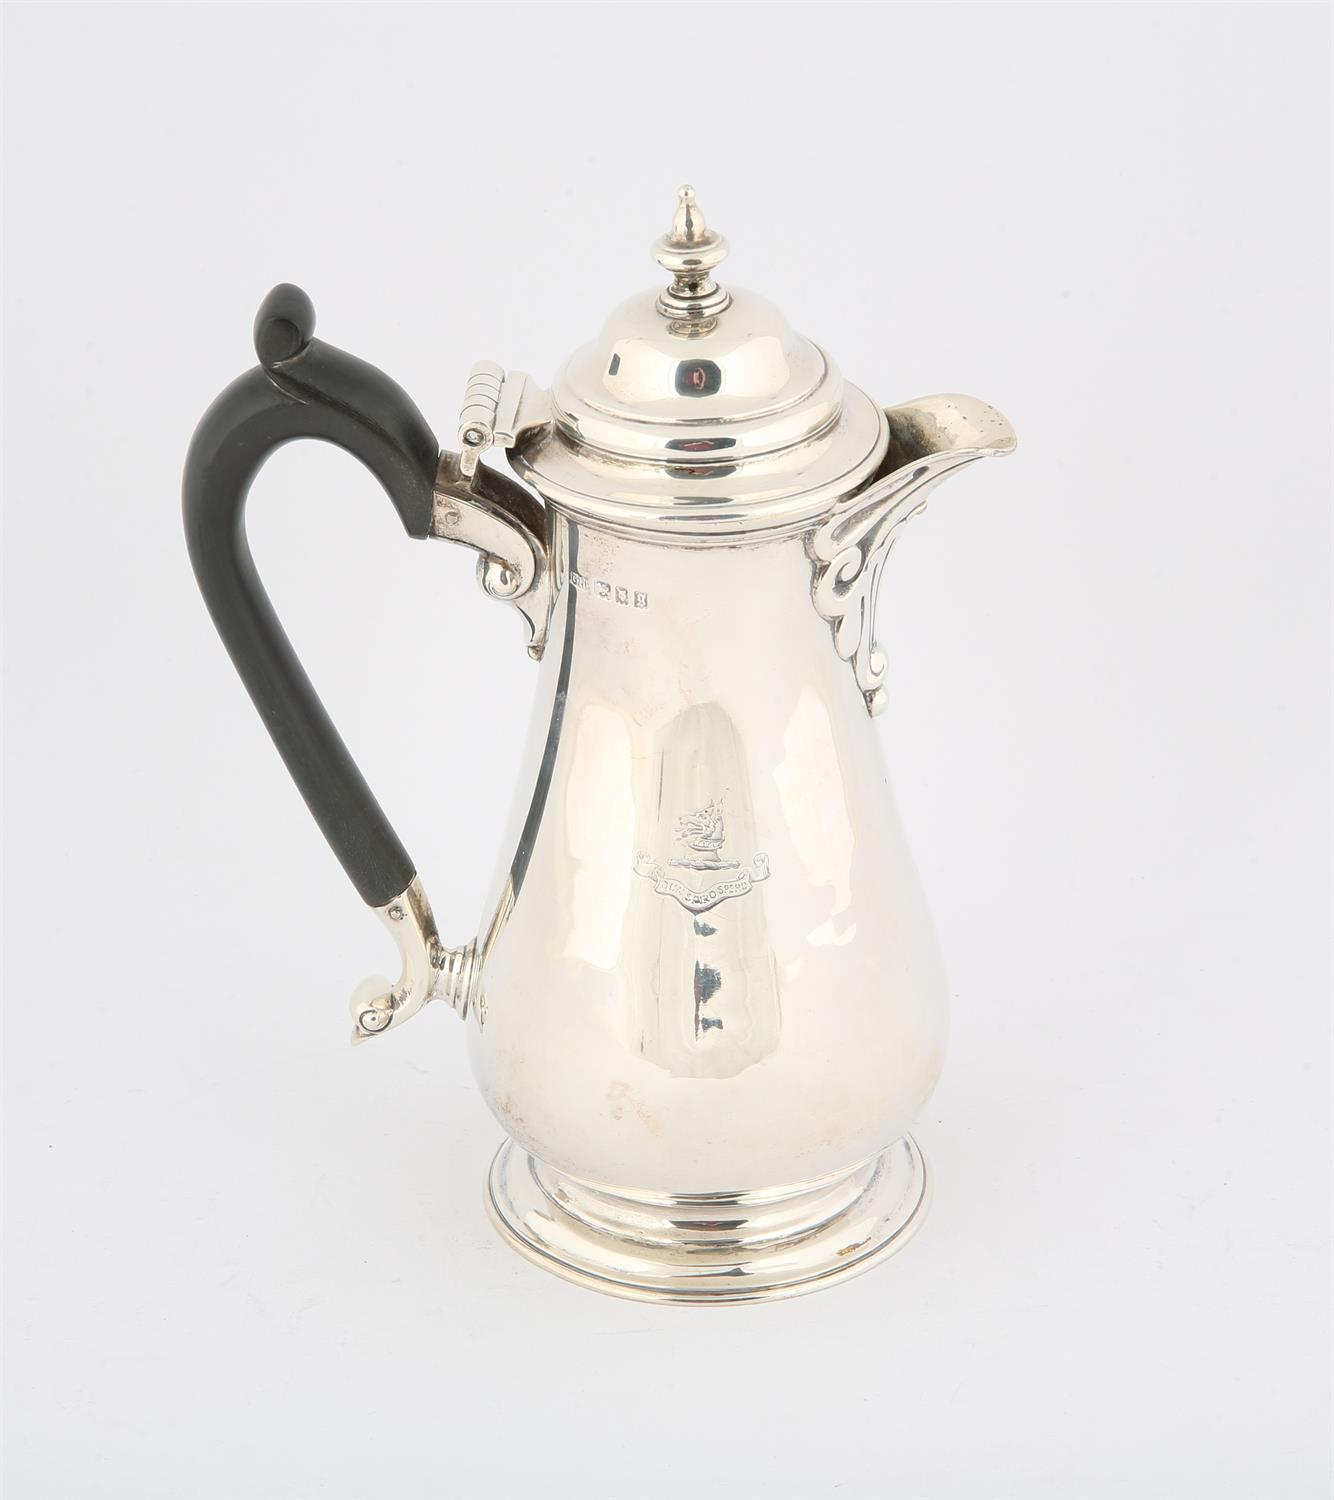 George V coffee pot of baluster form, engraved with an armorial and motto "Dum Spiro Spero",